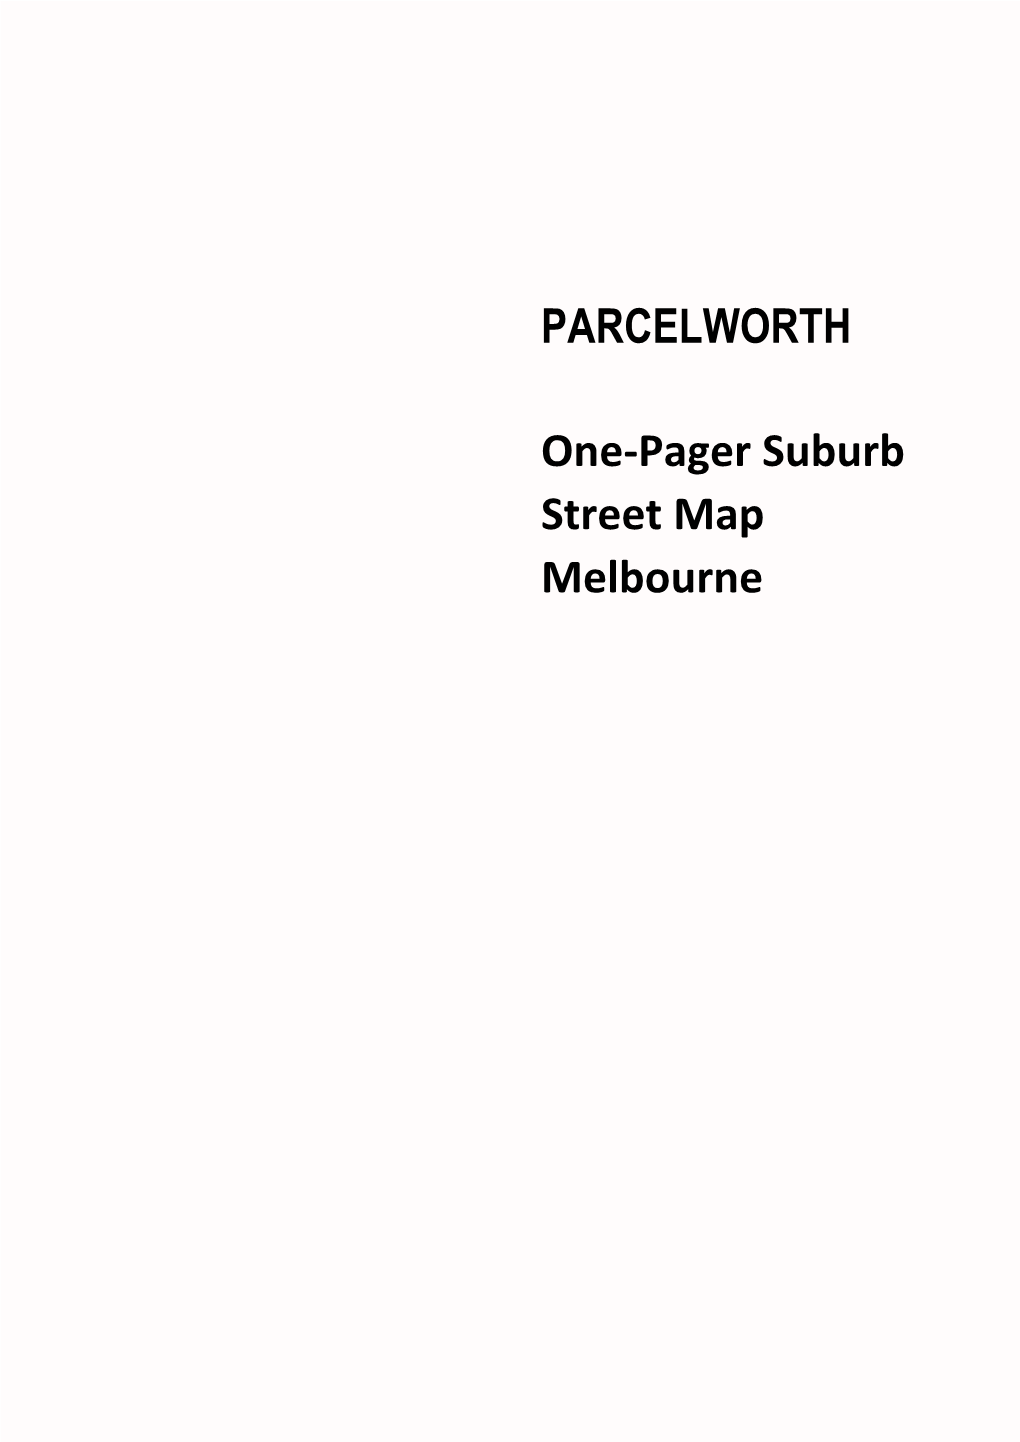 PARCELWORTH One-Pager Suburb Street Map Melbourne